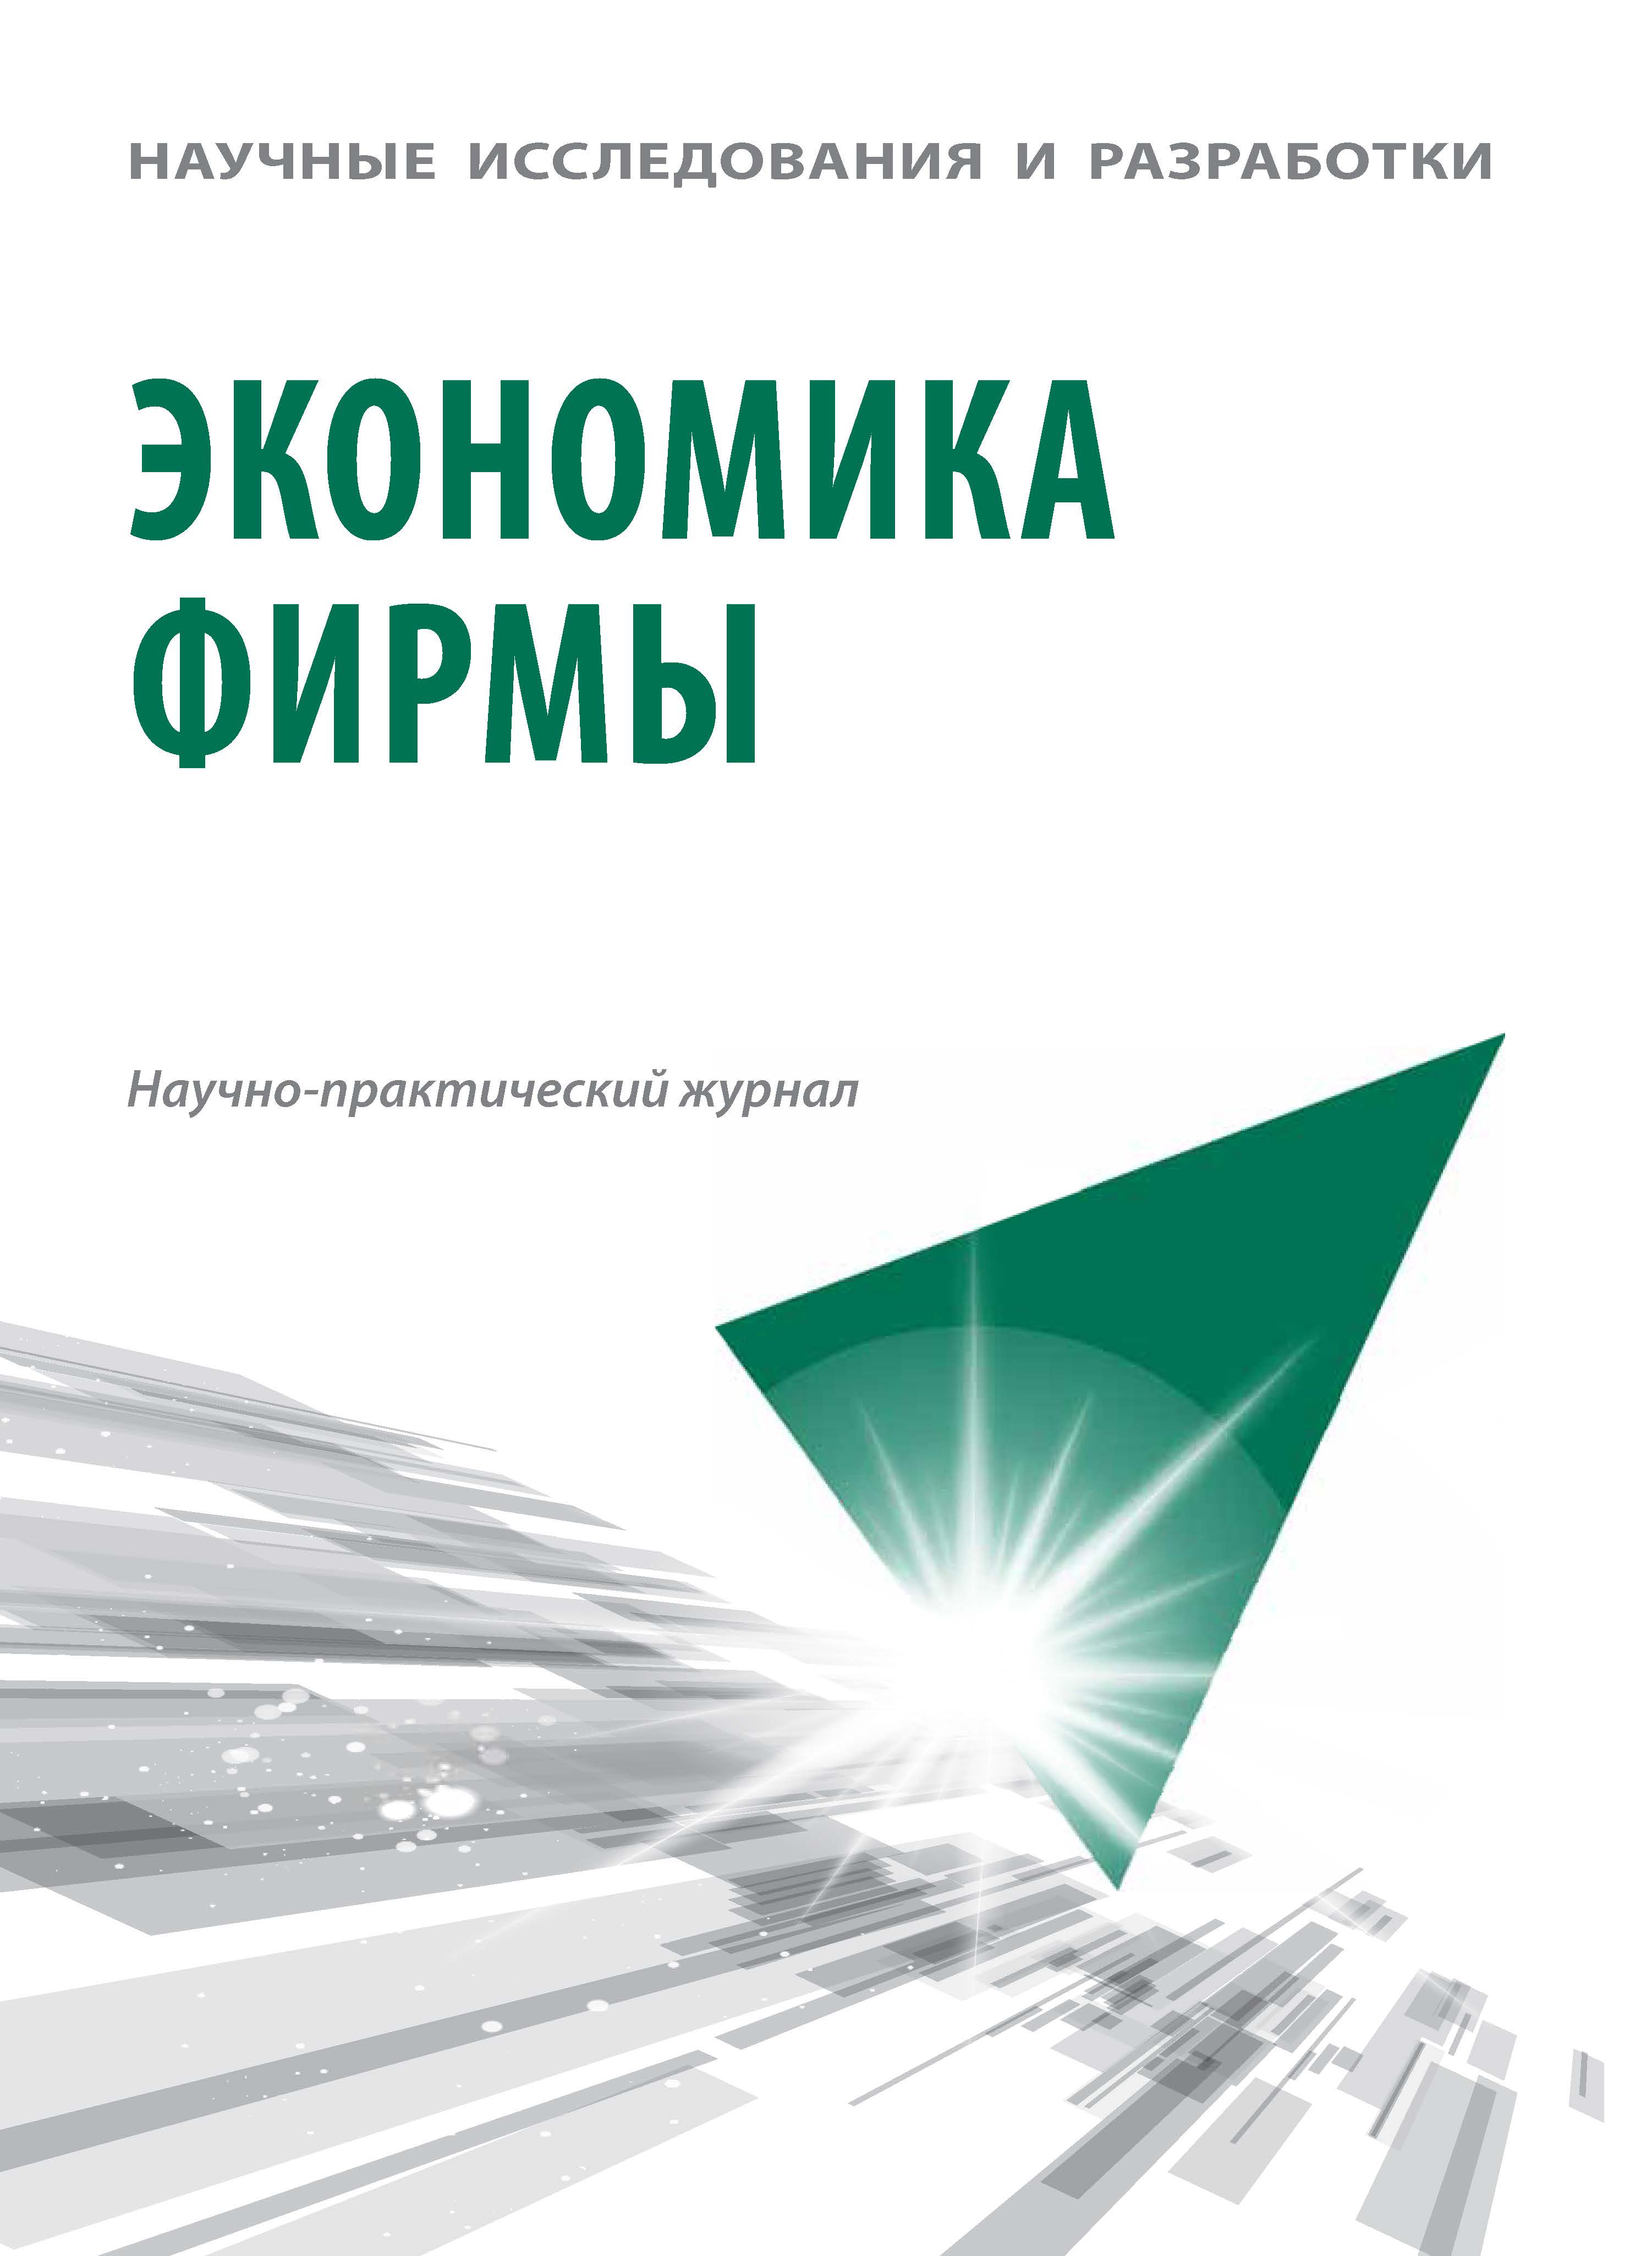                         Modern Trends in the Transformation of the Industrial Framework of the Russian Economy in the Context of Digitalization and Industry 4.0
            